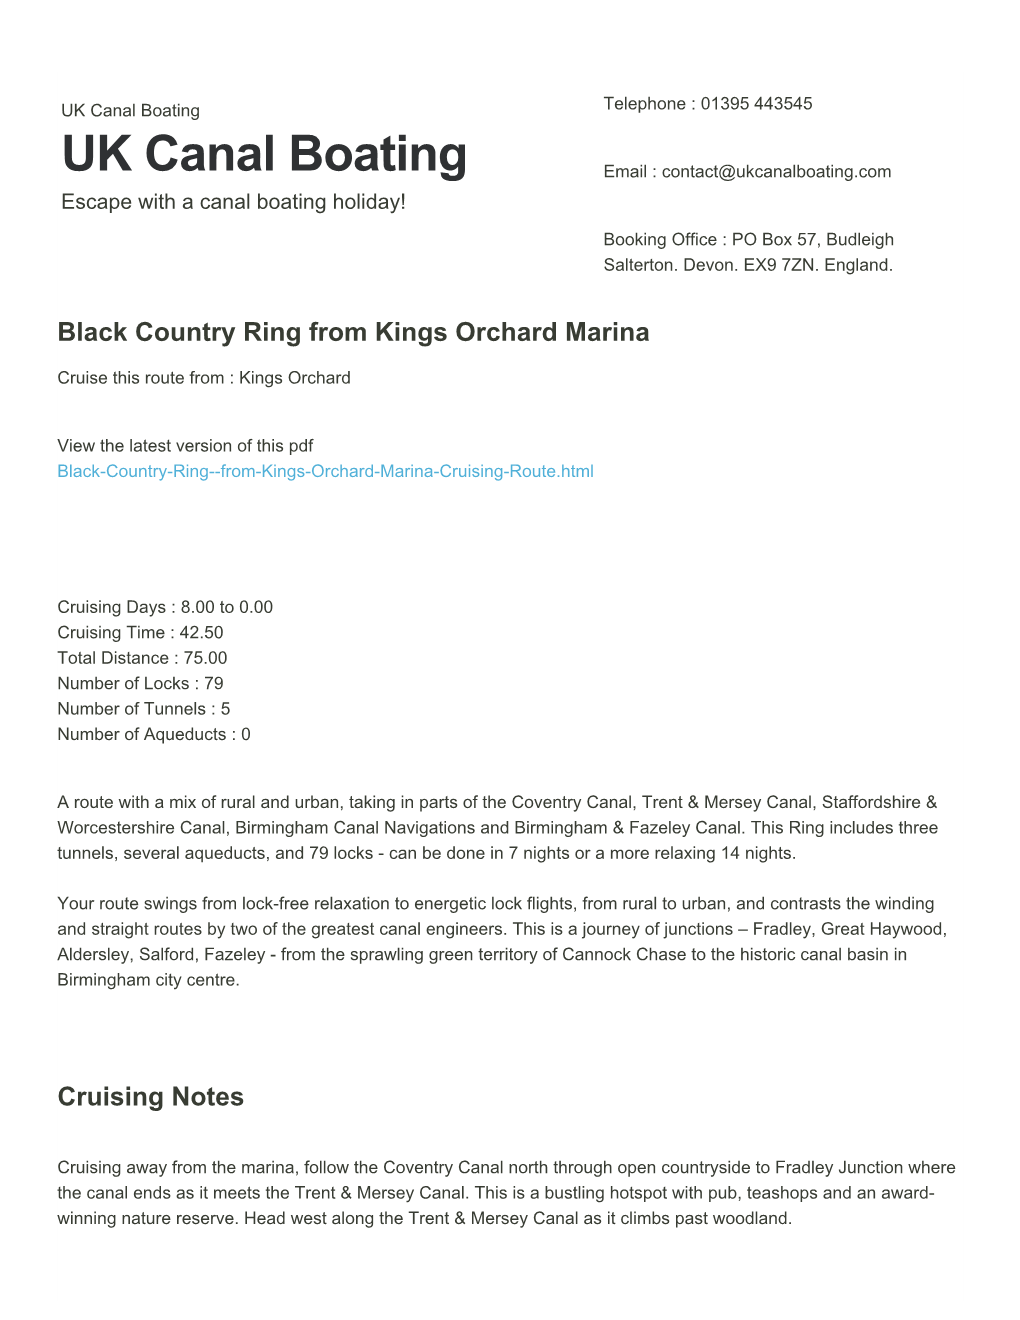 Black Country Ring from Kings Orchard Marina | UK Canal Boating